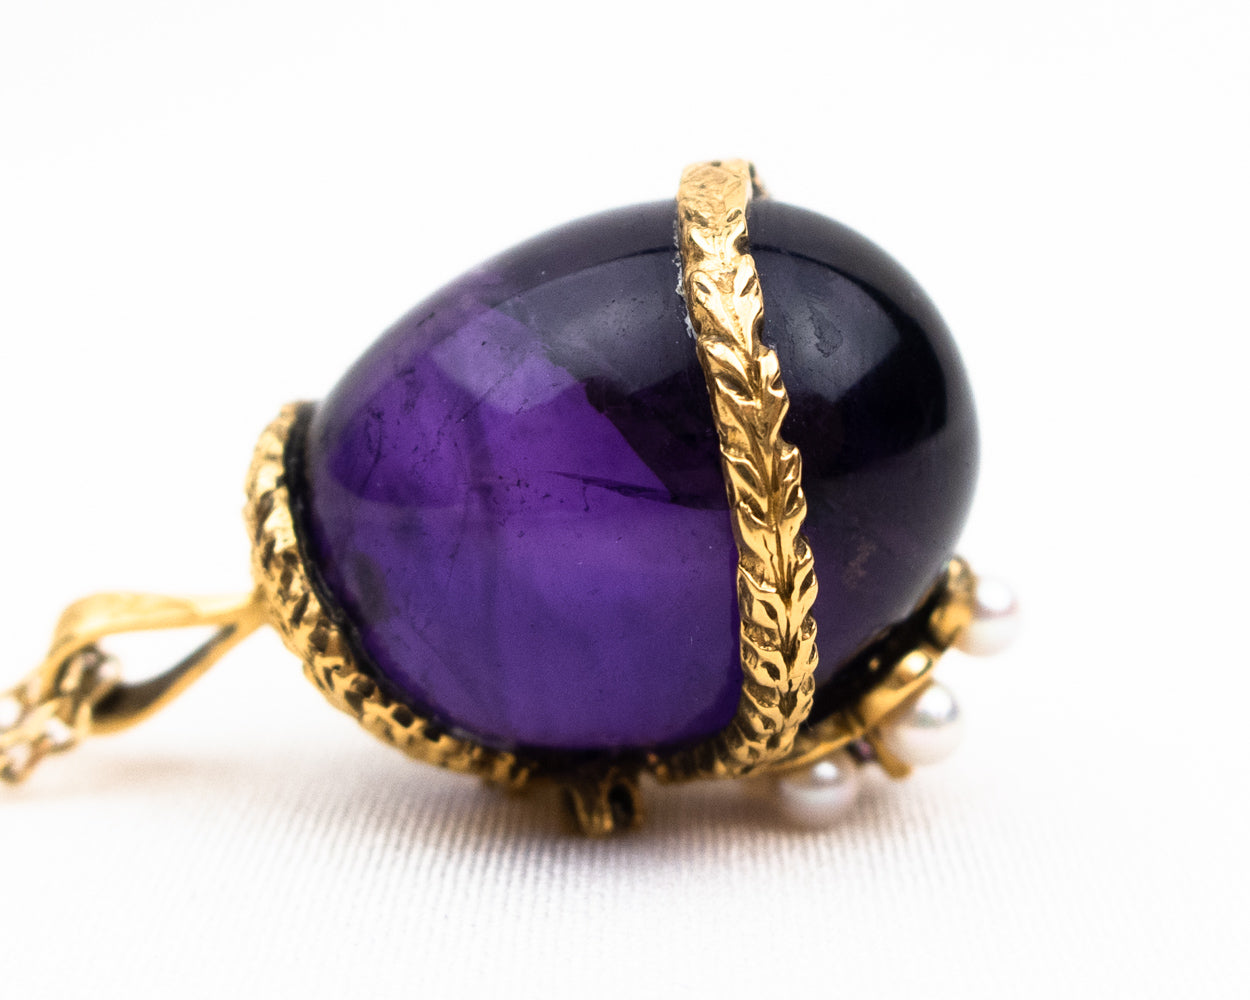 1980s Egg-Shaped Amethyst Pendant Necklace